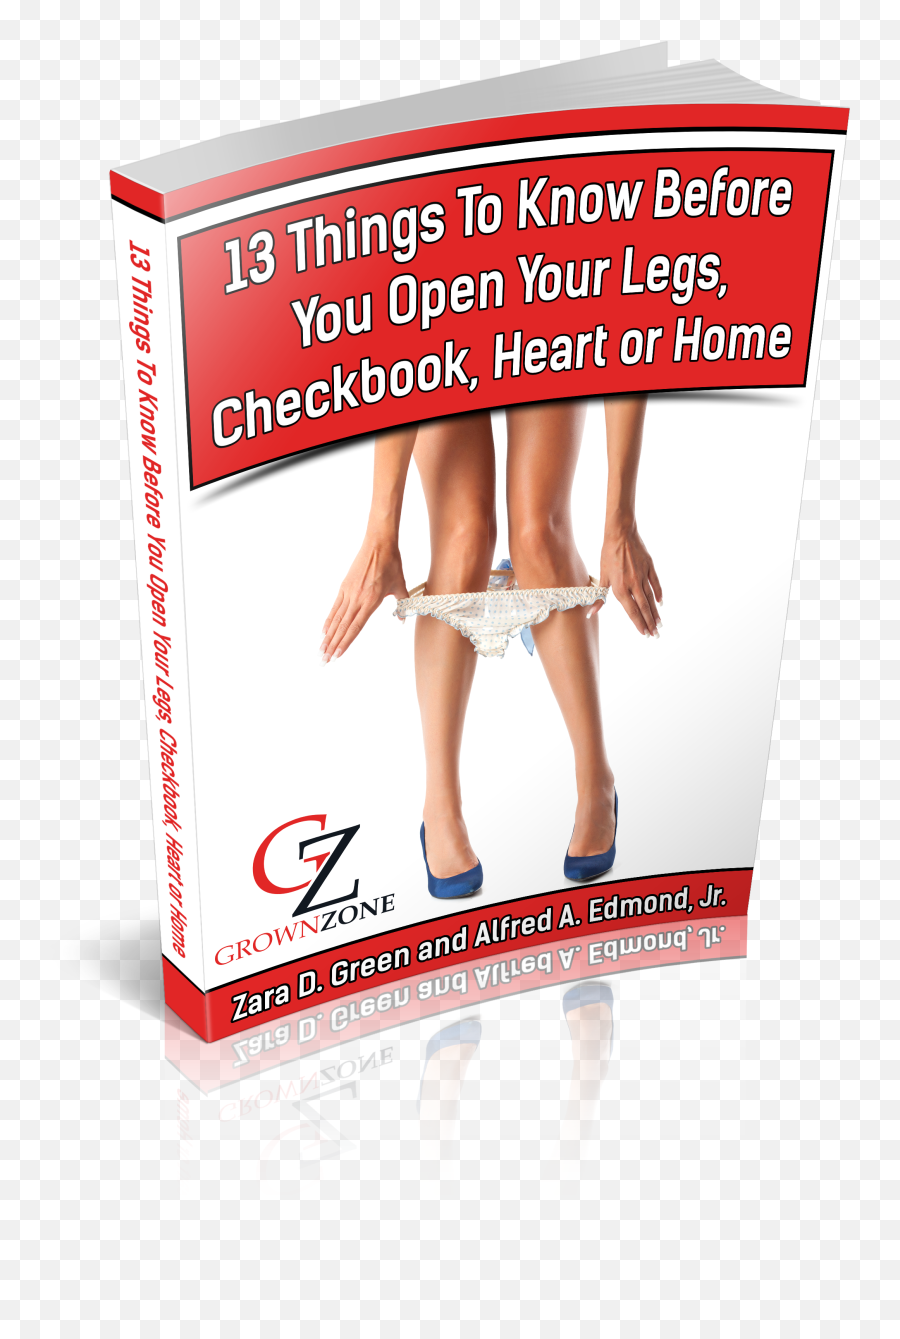 Open Your Legs Checkbook Heart - For Women Emoji,Feel Emotions In My Thighs